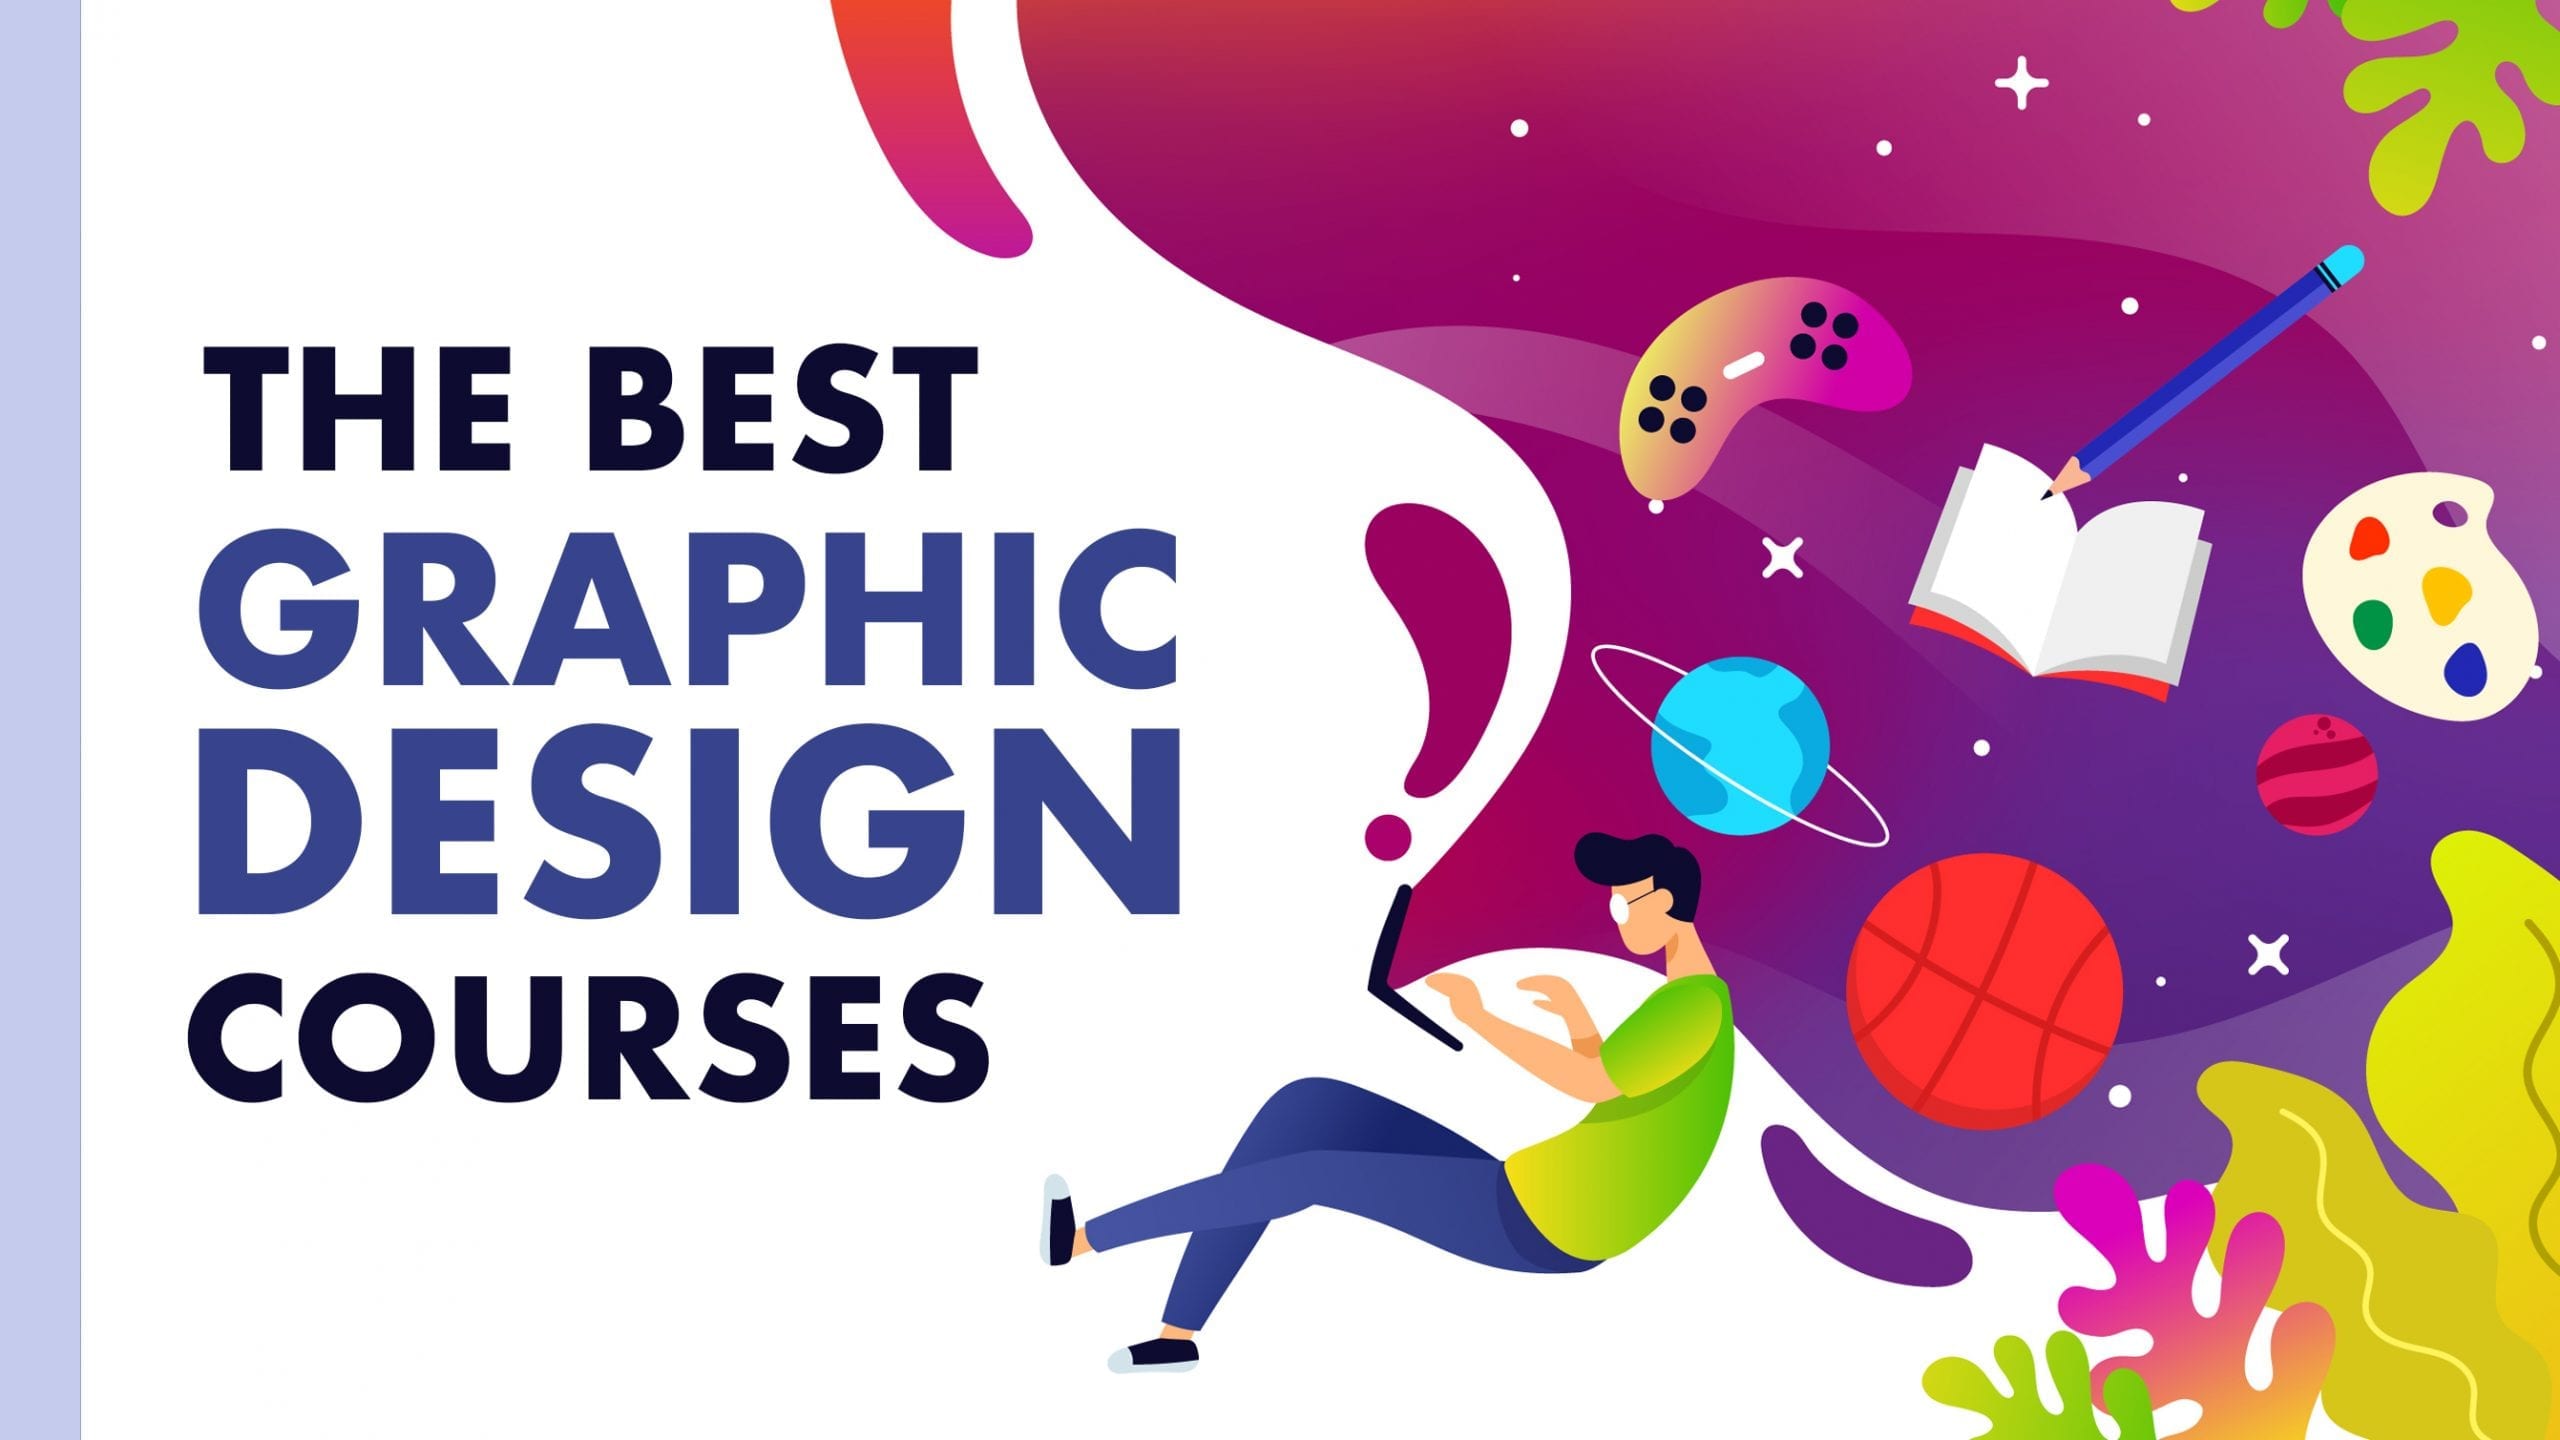 5 Best Graphic Design Courses Classes (with Certificate) Online